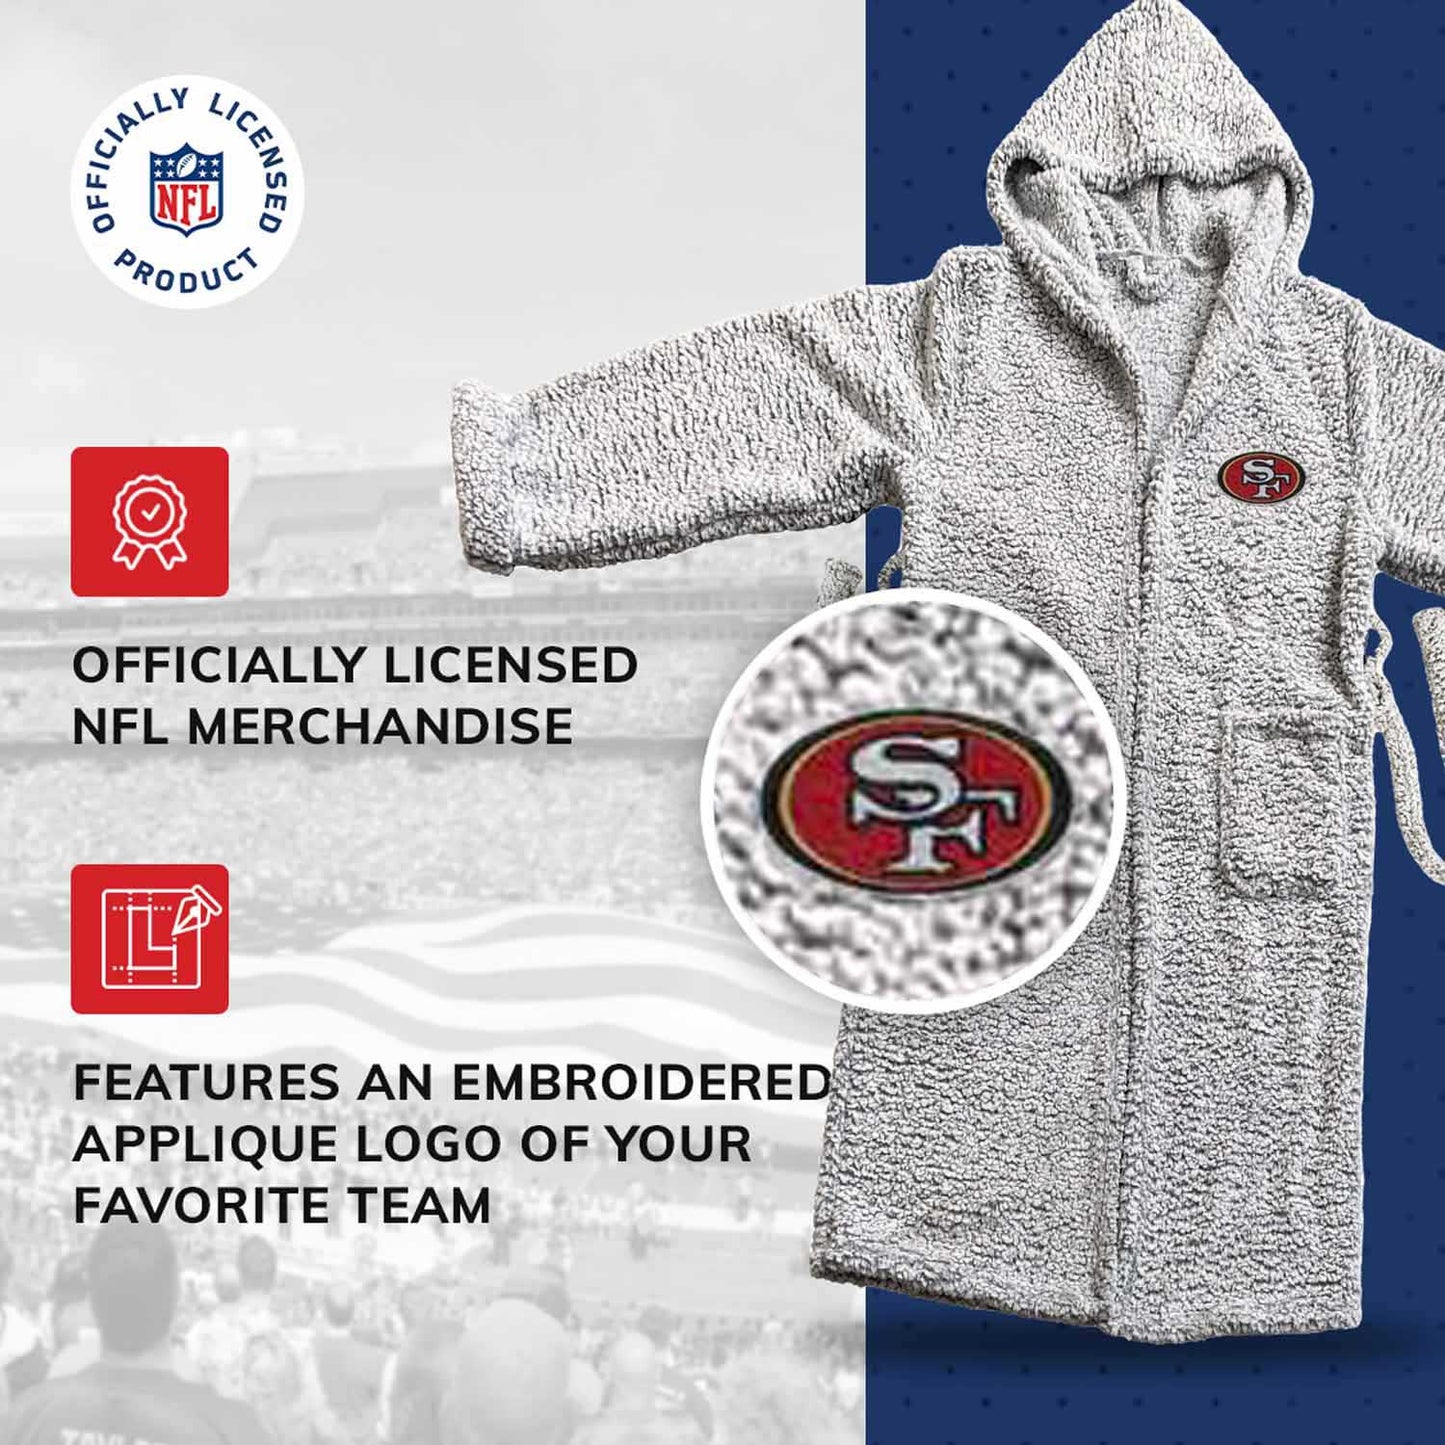 San Francisco 49ers NFL Plush Hooded Robe with Pockets - Gray